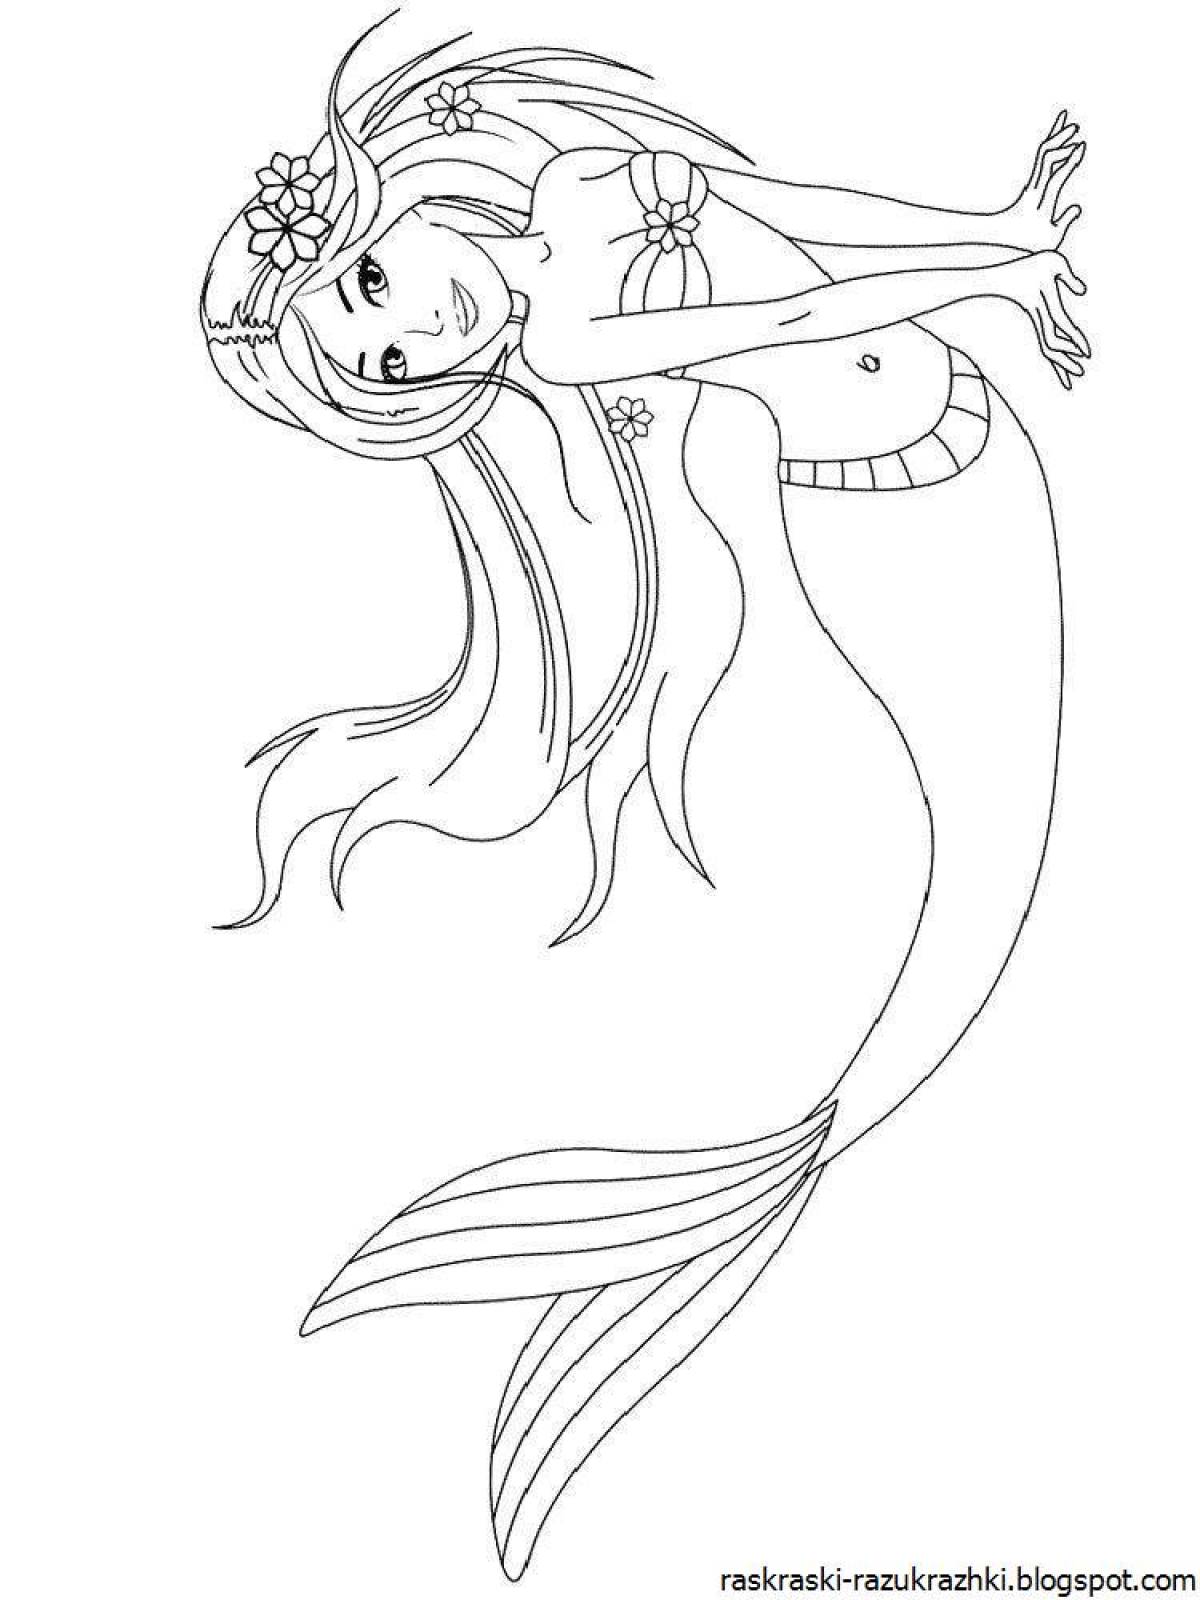 Dreamy coloring for girls mermaid